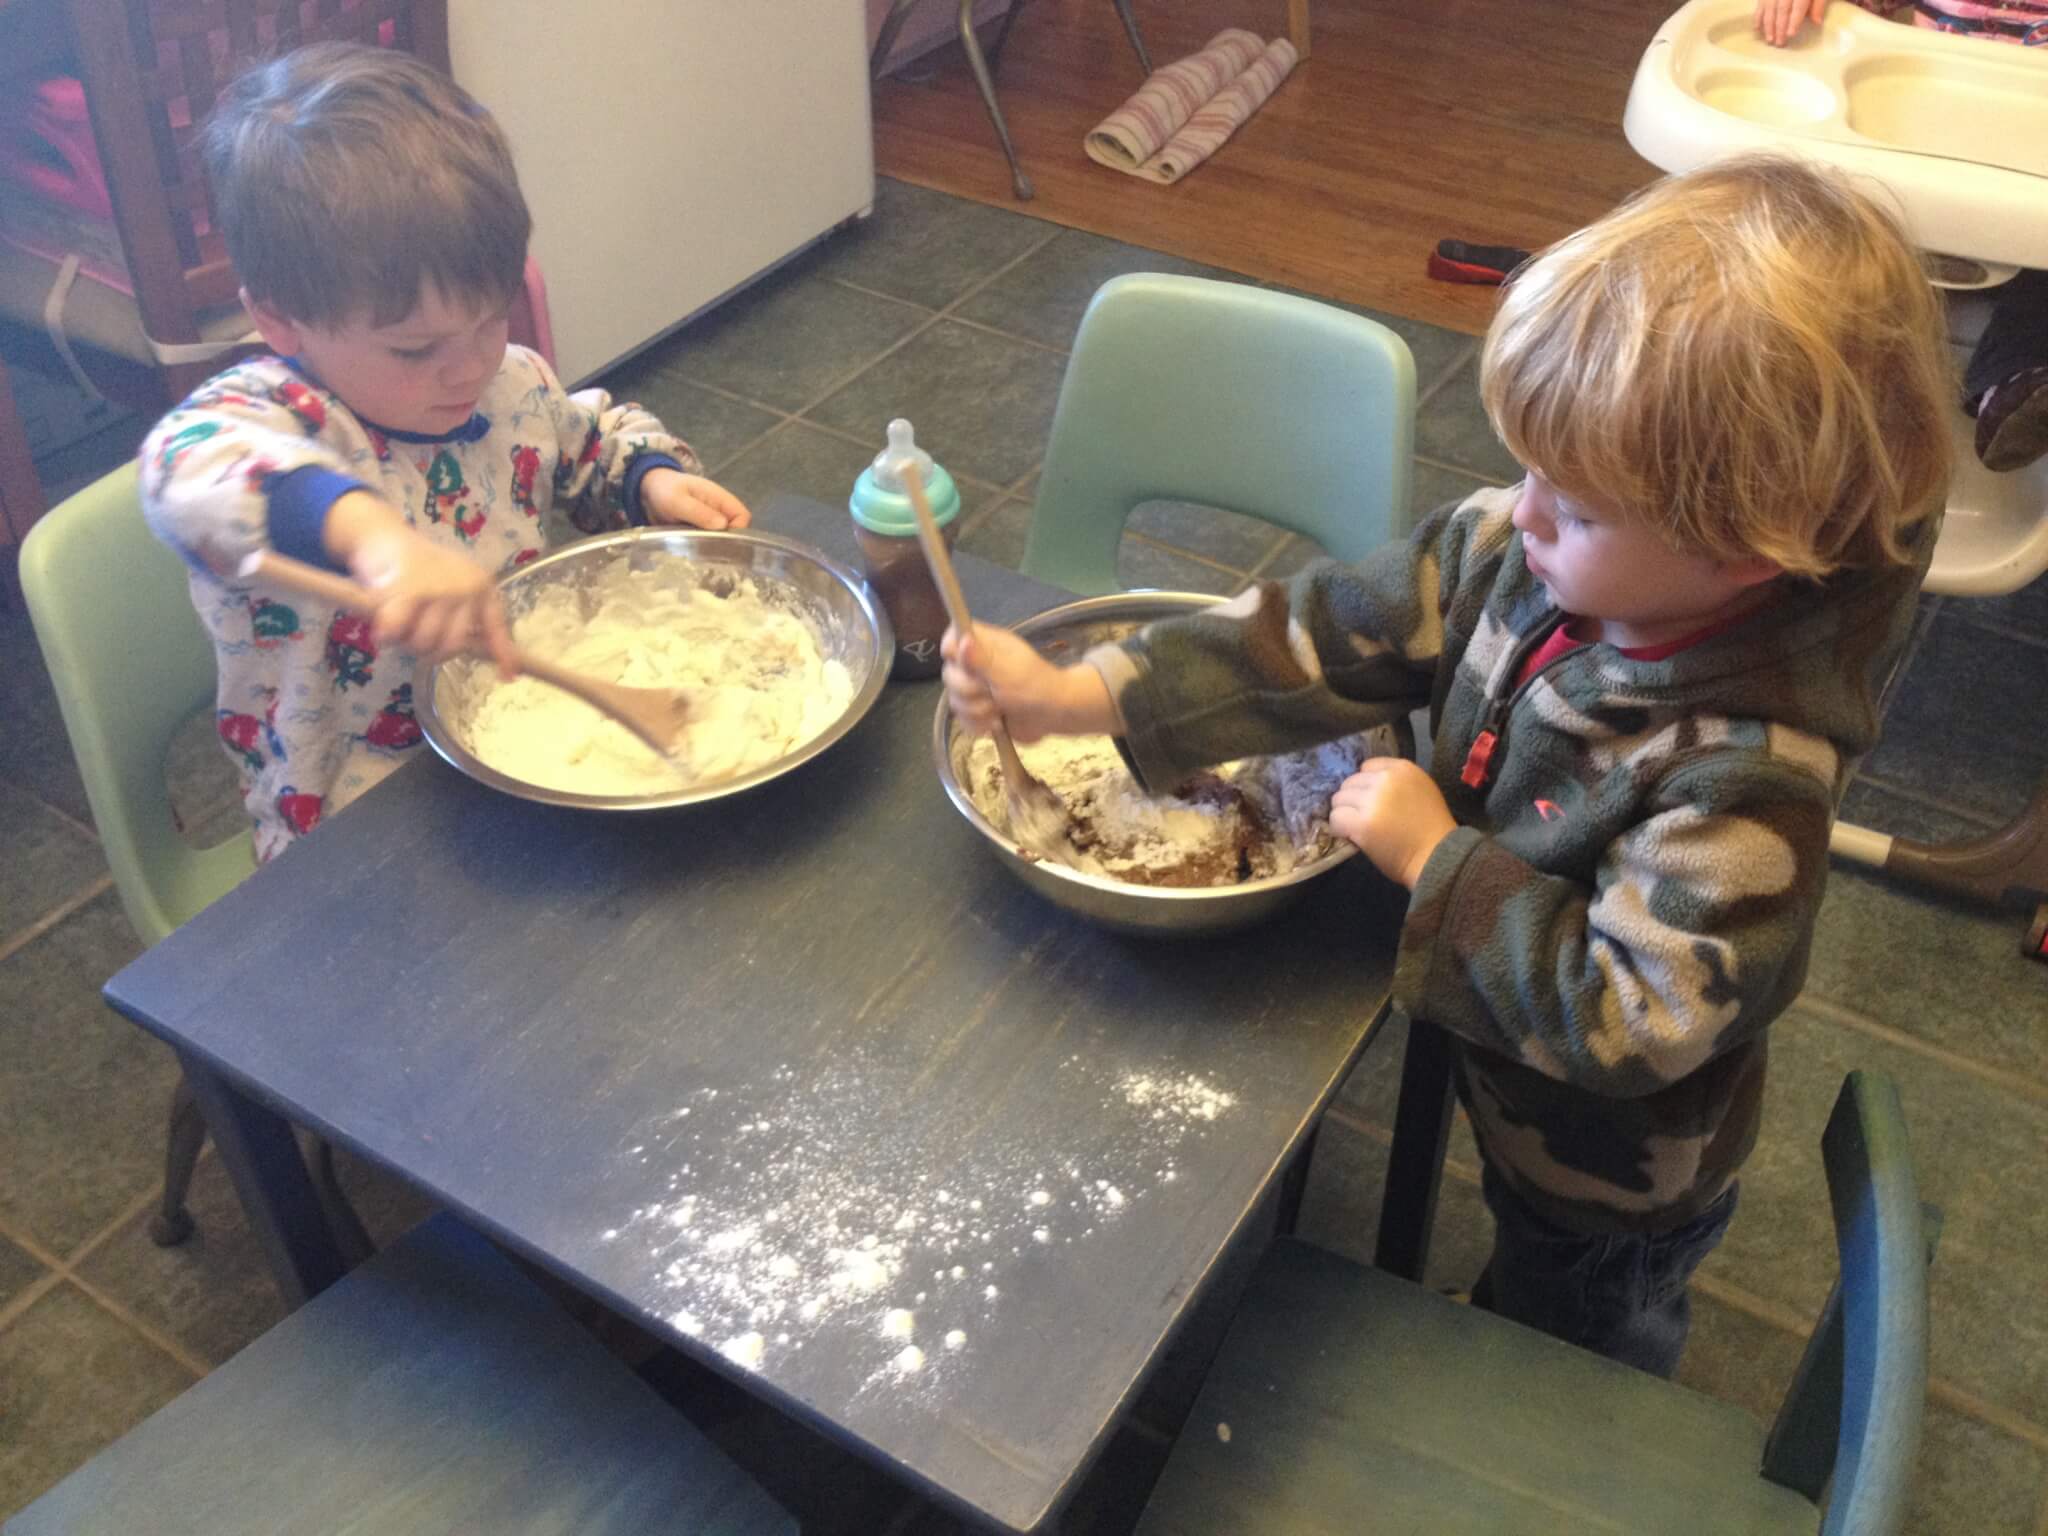 Making Homemade Play Dough in the Kids Kitchen: Let Kids Help